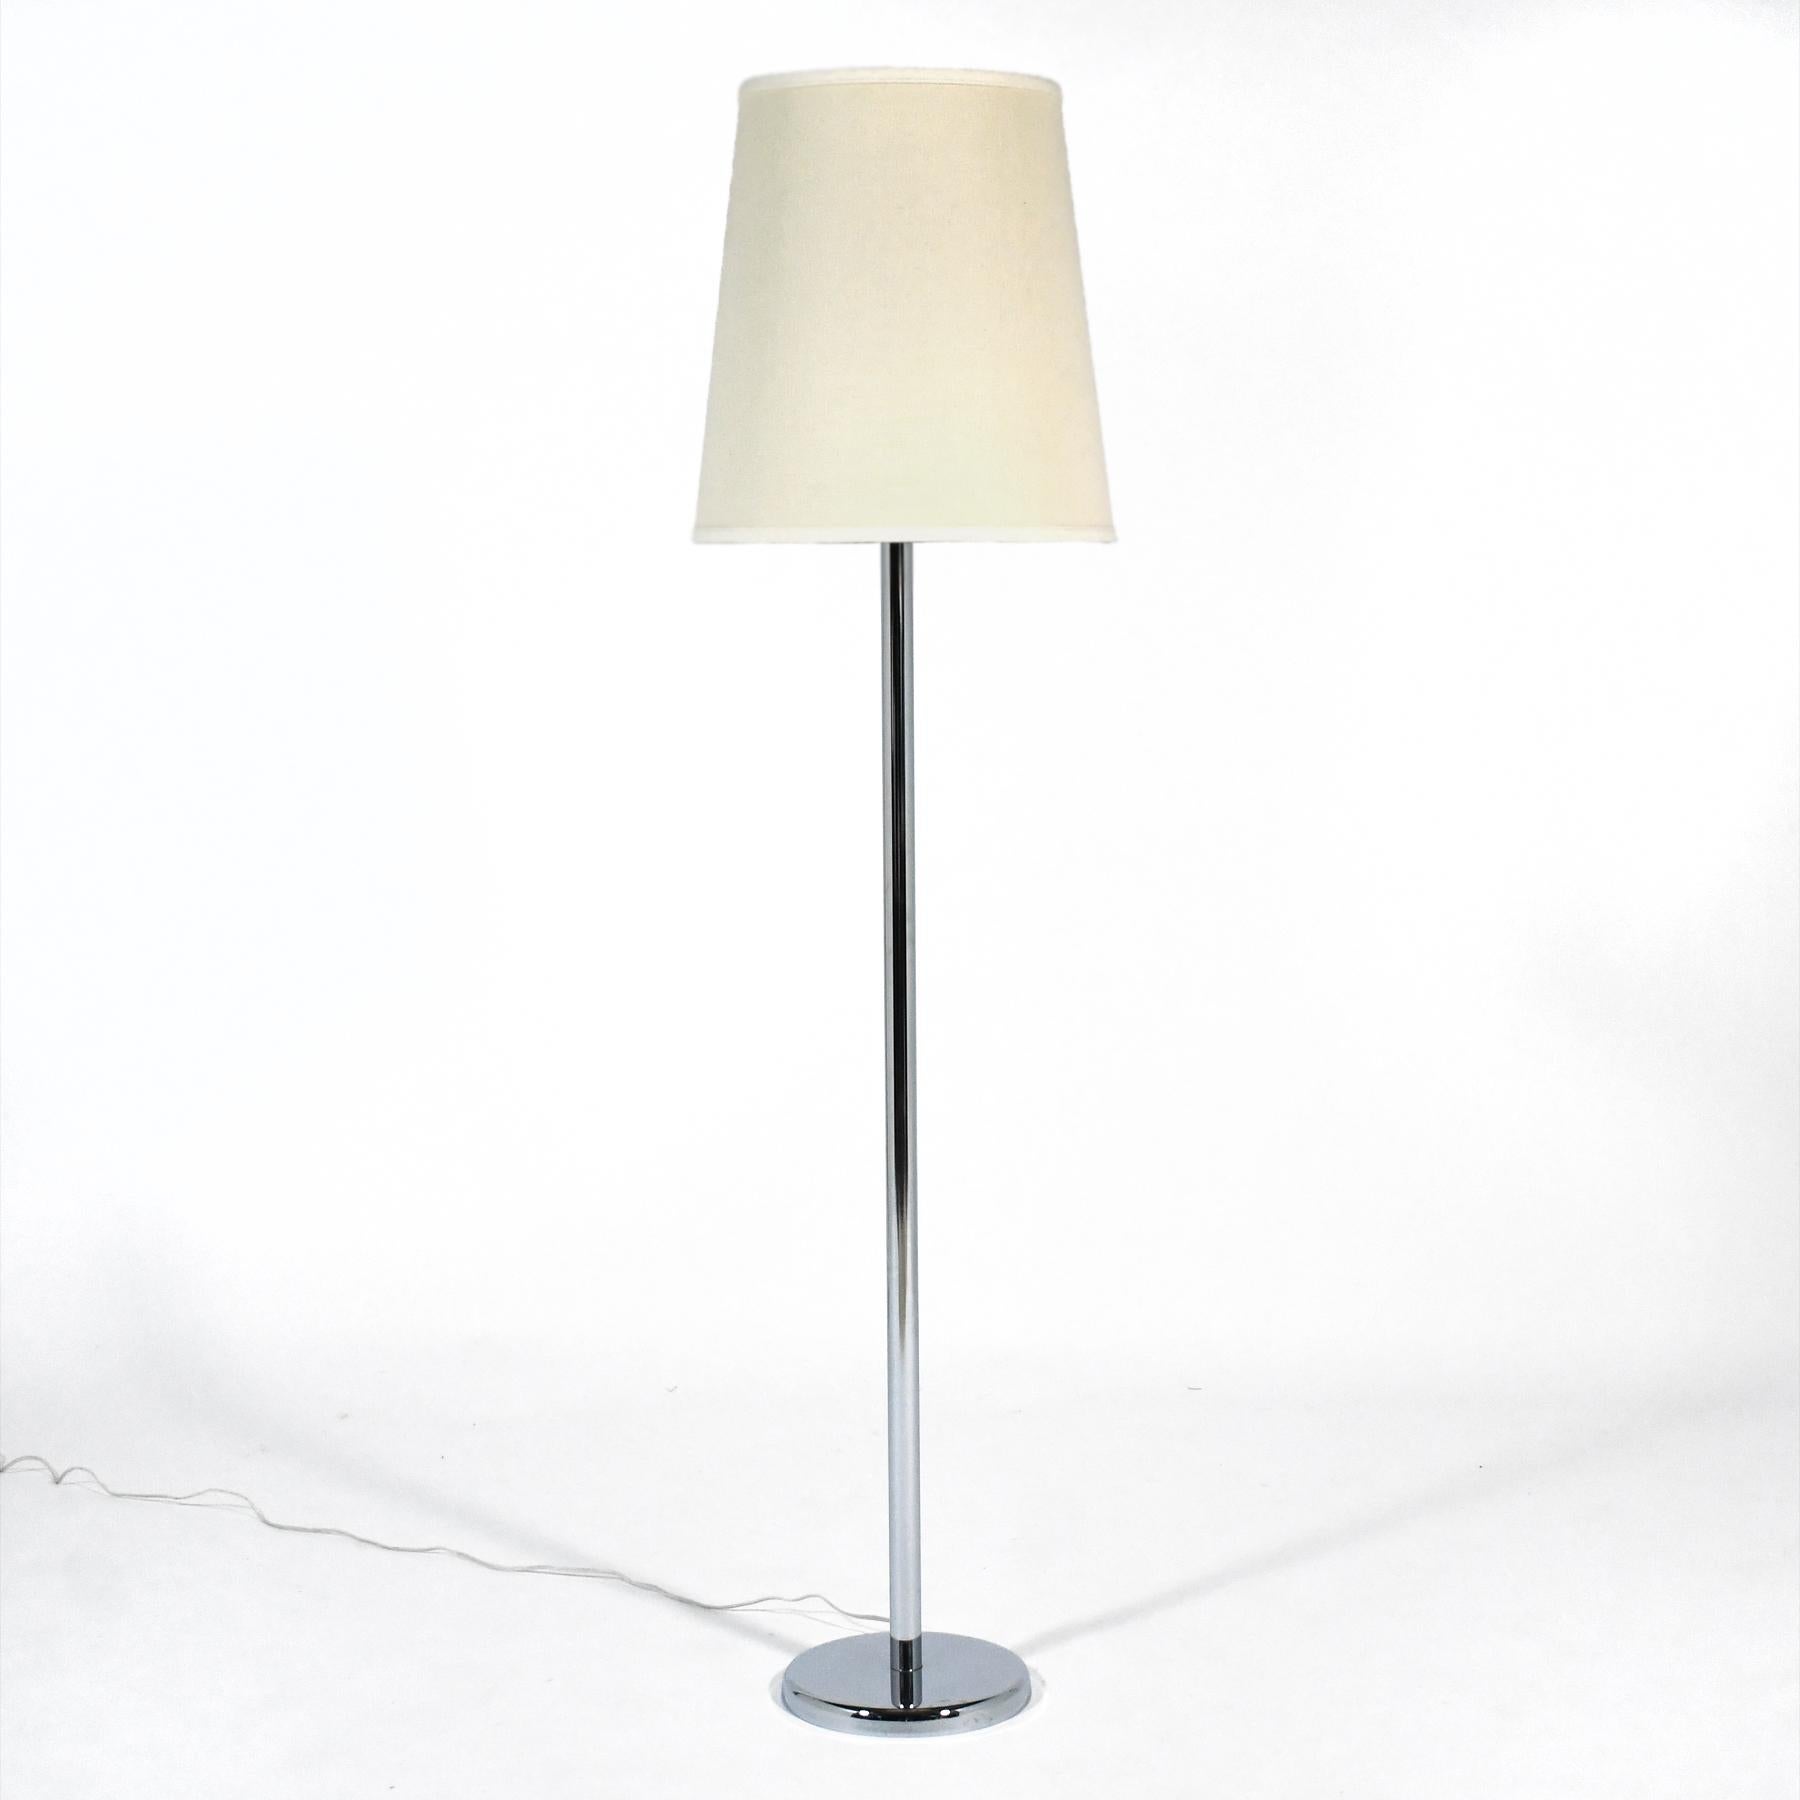 This clean-lined chrome modernist floor lamp from the late 1960s is by George Kovacs. It is very well made and in very good original condition. It is fitted with a 5 bulb socket head that has a 3-way switch to offer the desired amount of